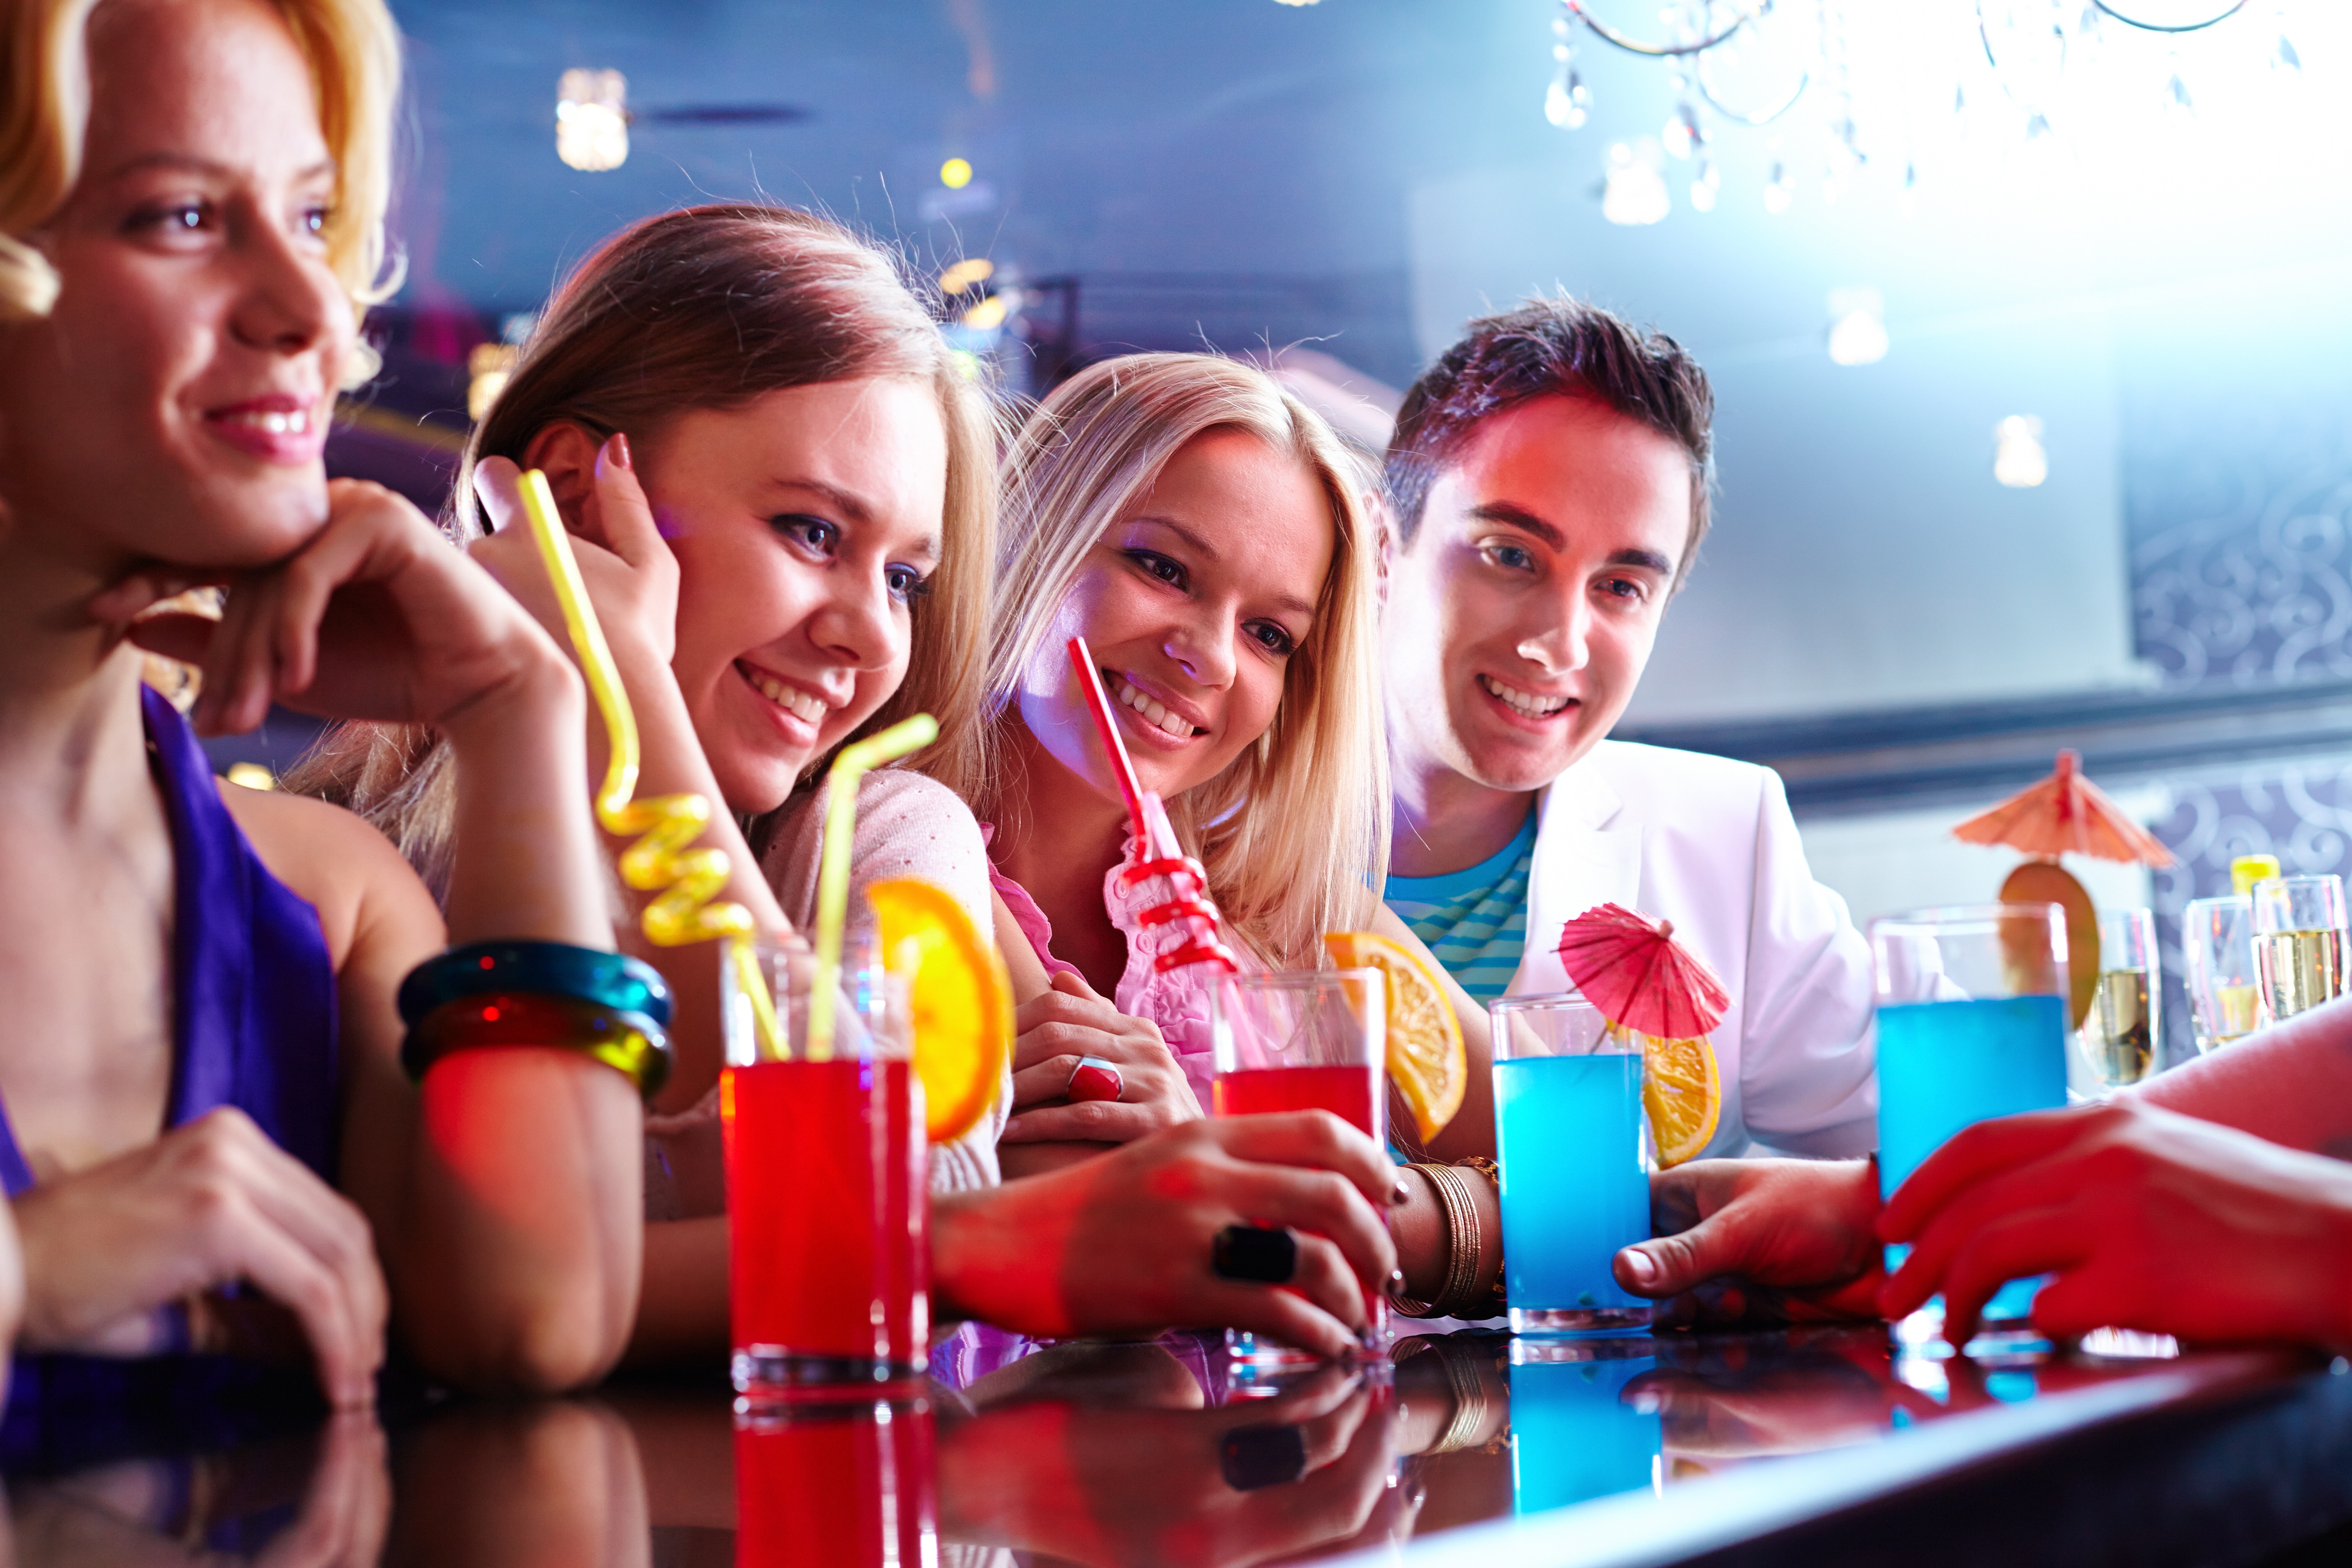 A group of people sitting at a bar with drinks.